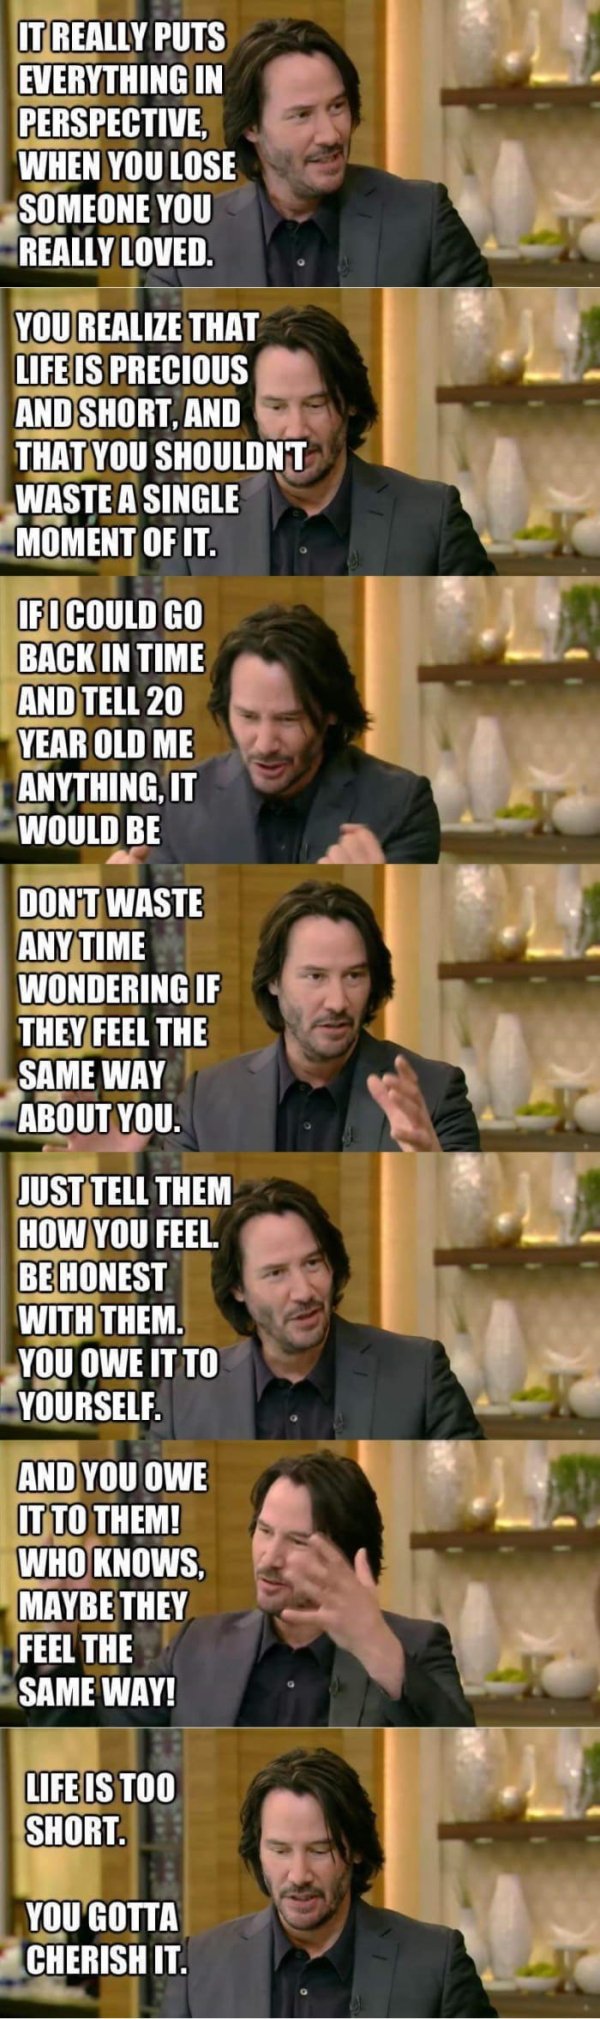 wholesome meme Keanu Reeves meme giving some really good and wise advice.